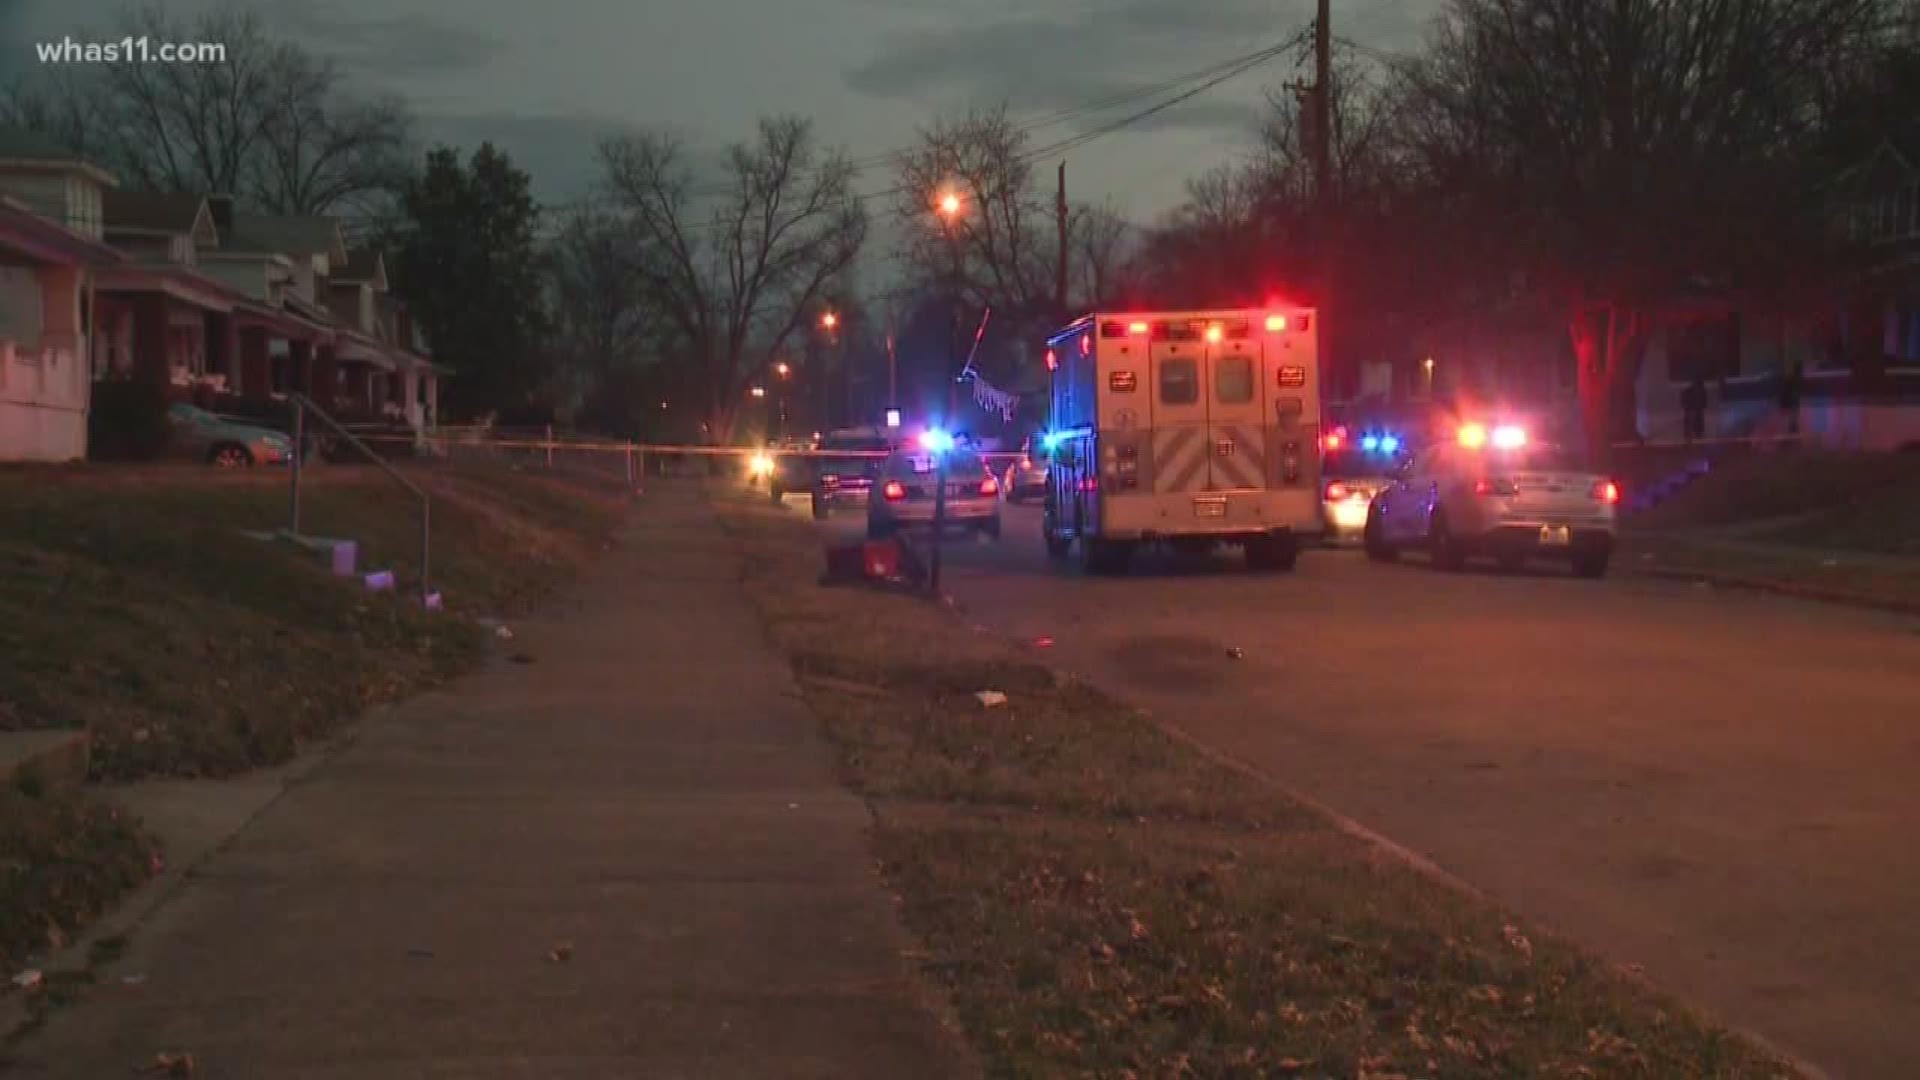 A young man in his late teens was shot and killed early Monday morning.